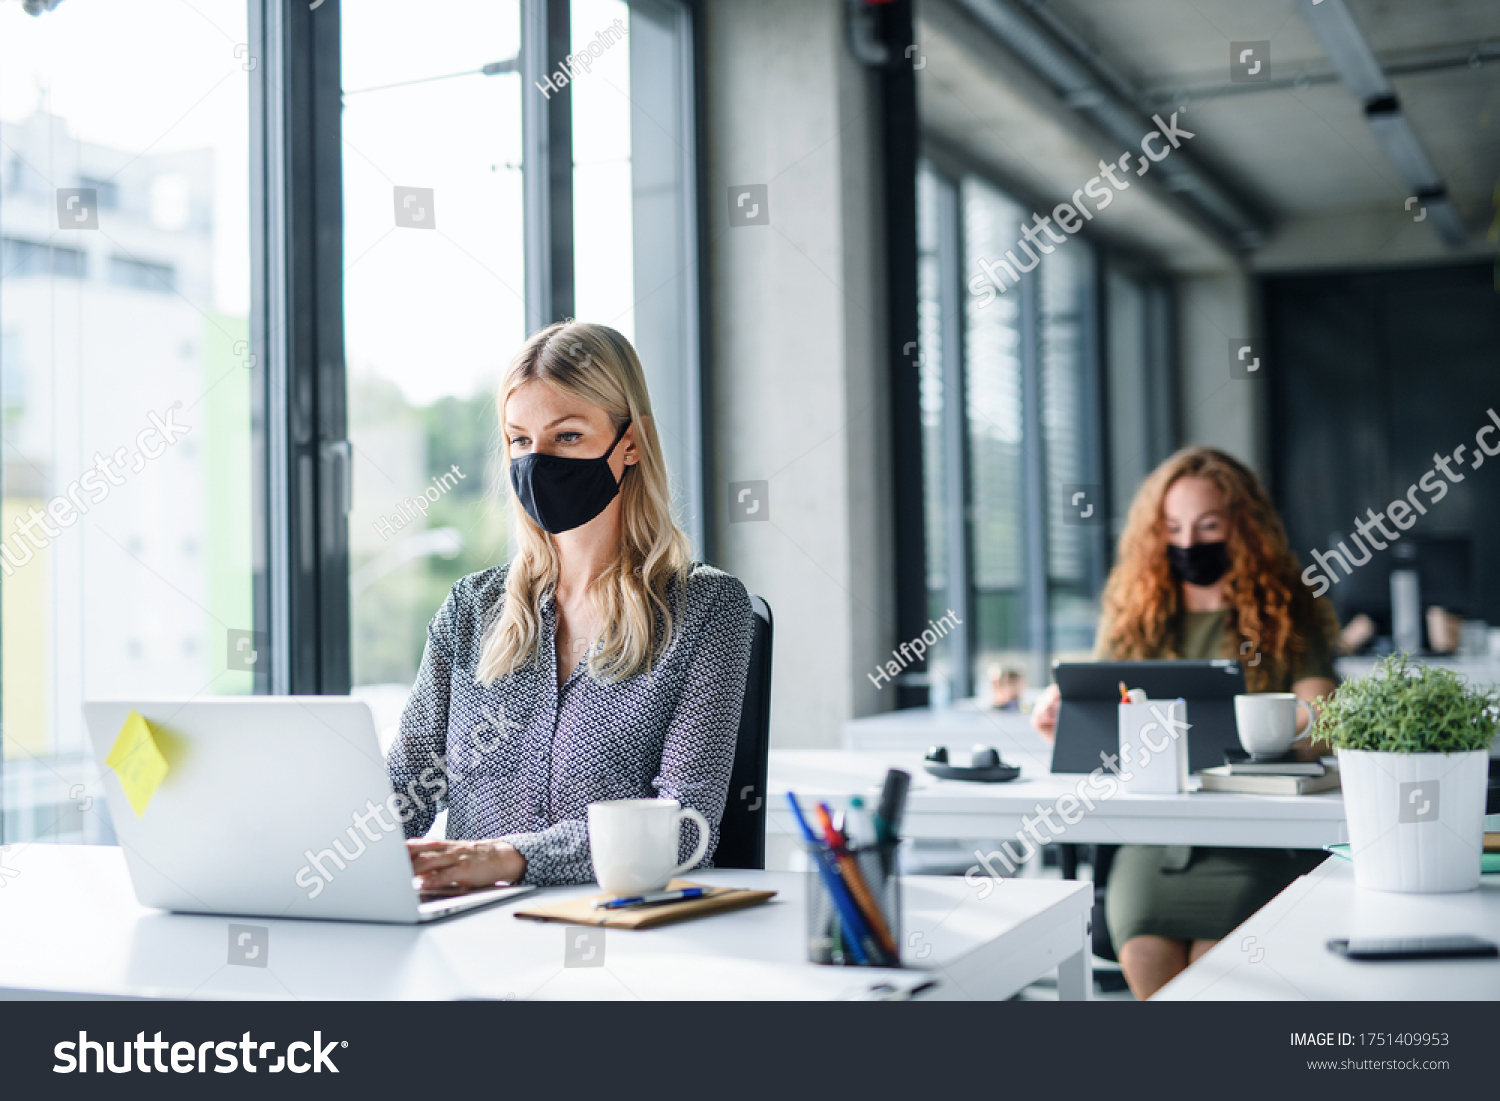 Young people with face masks back at work or school in office after lockdown. #1751409953